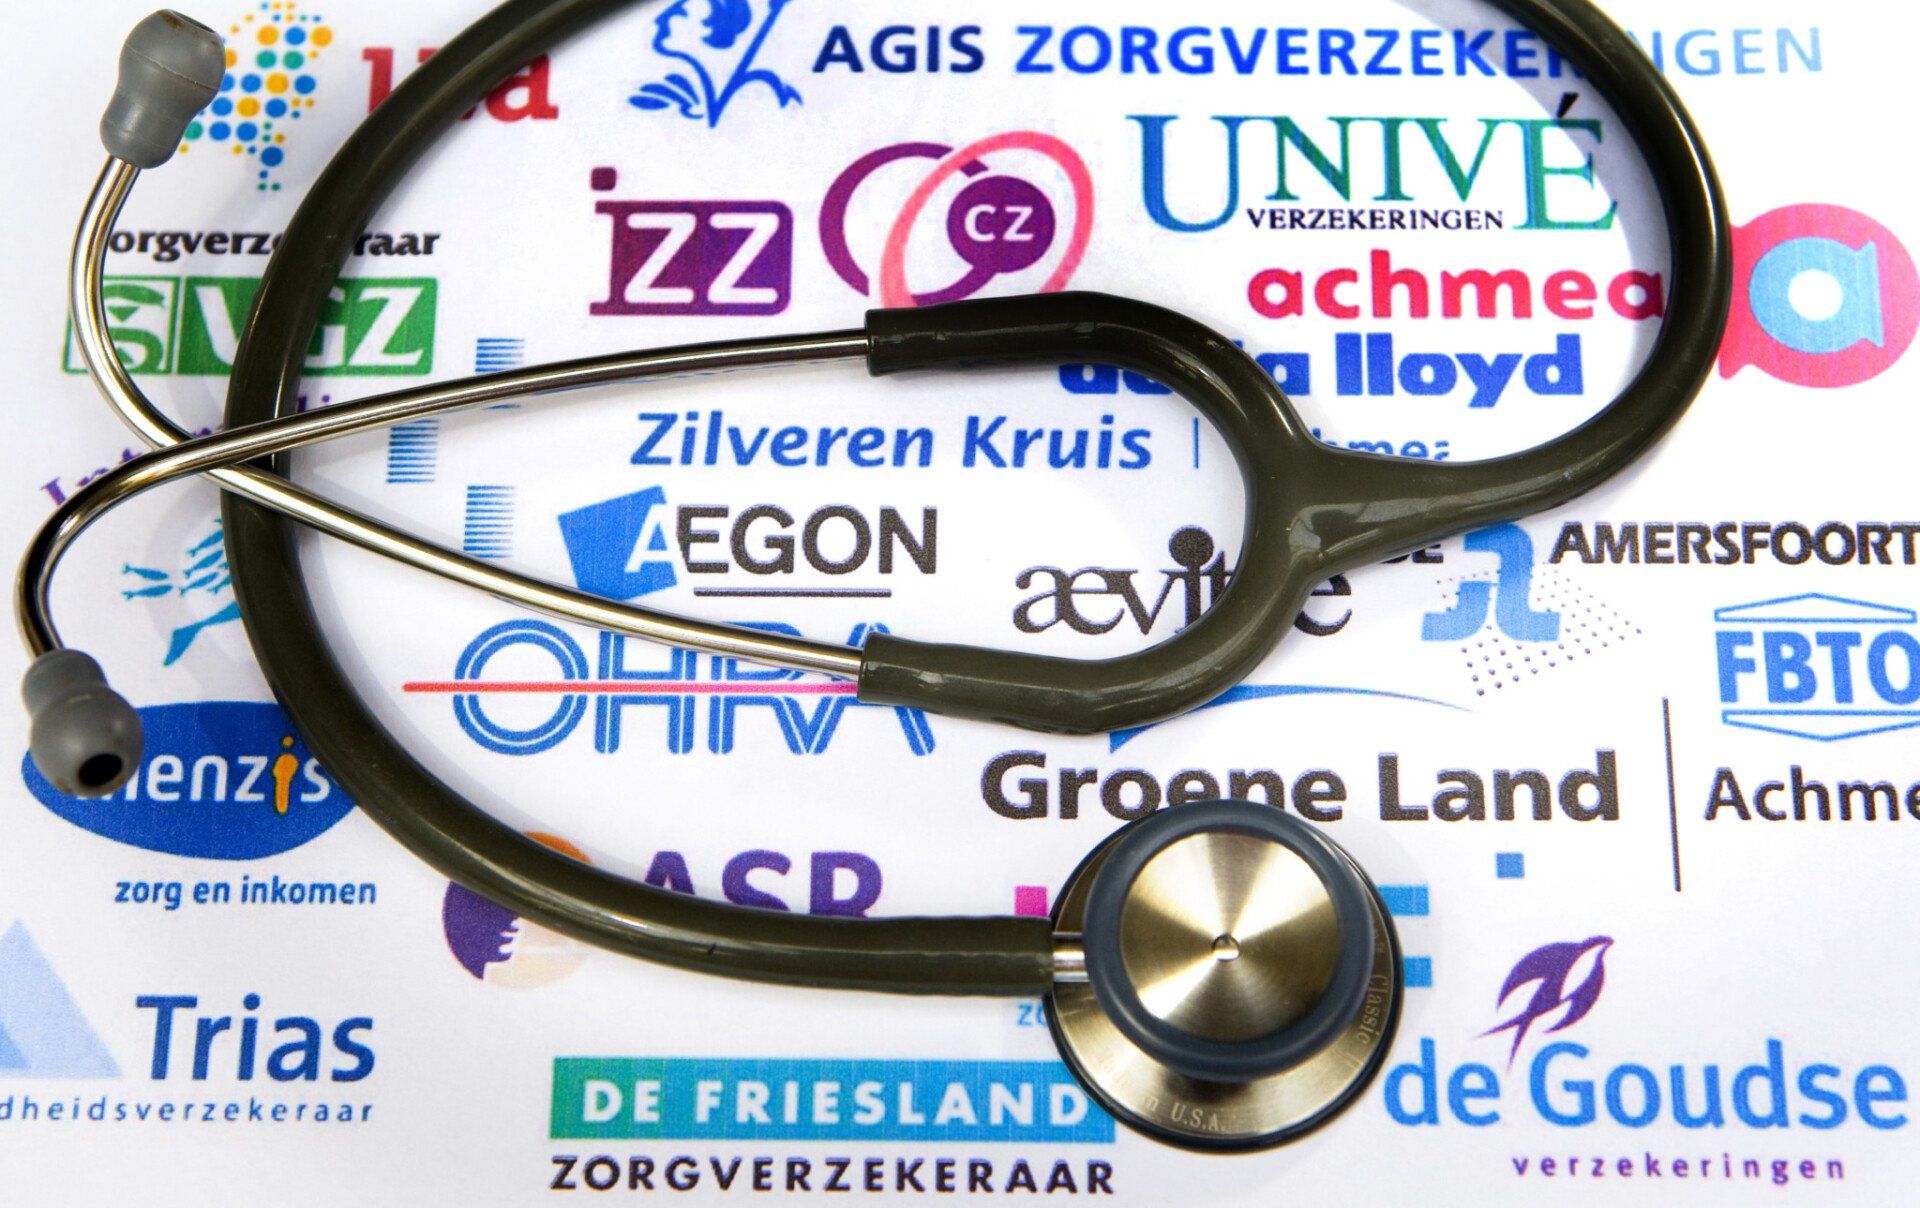 Get yourself a health insurance in The Netherlands